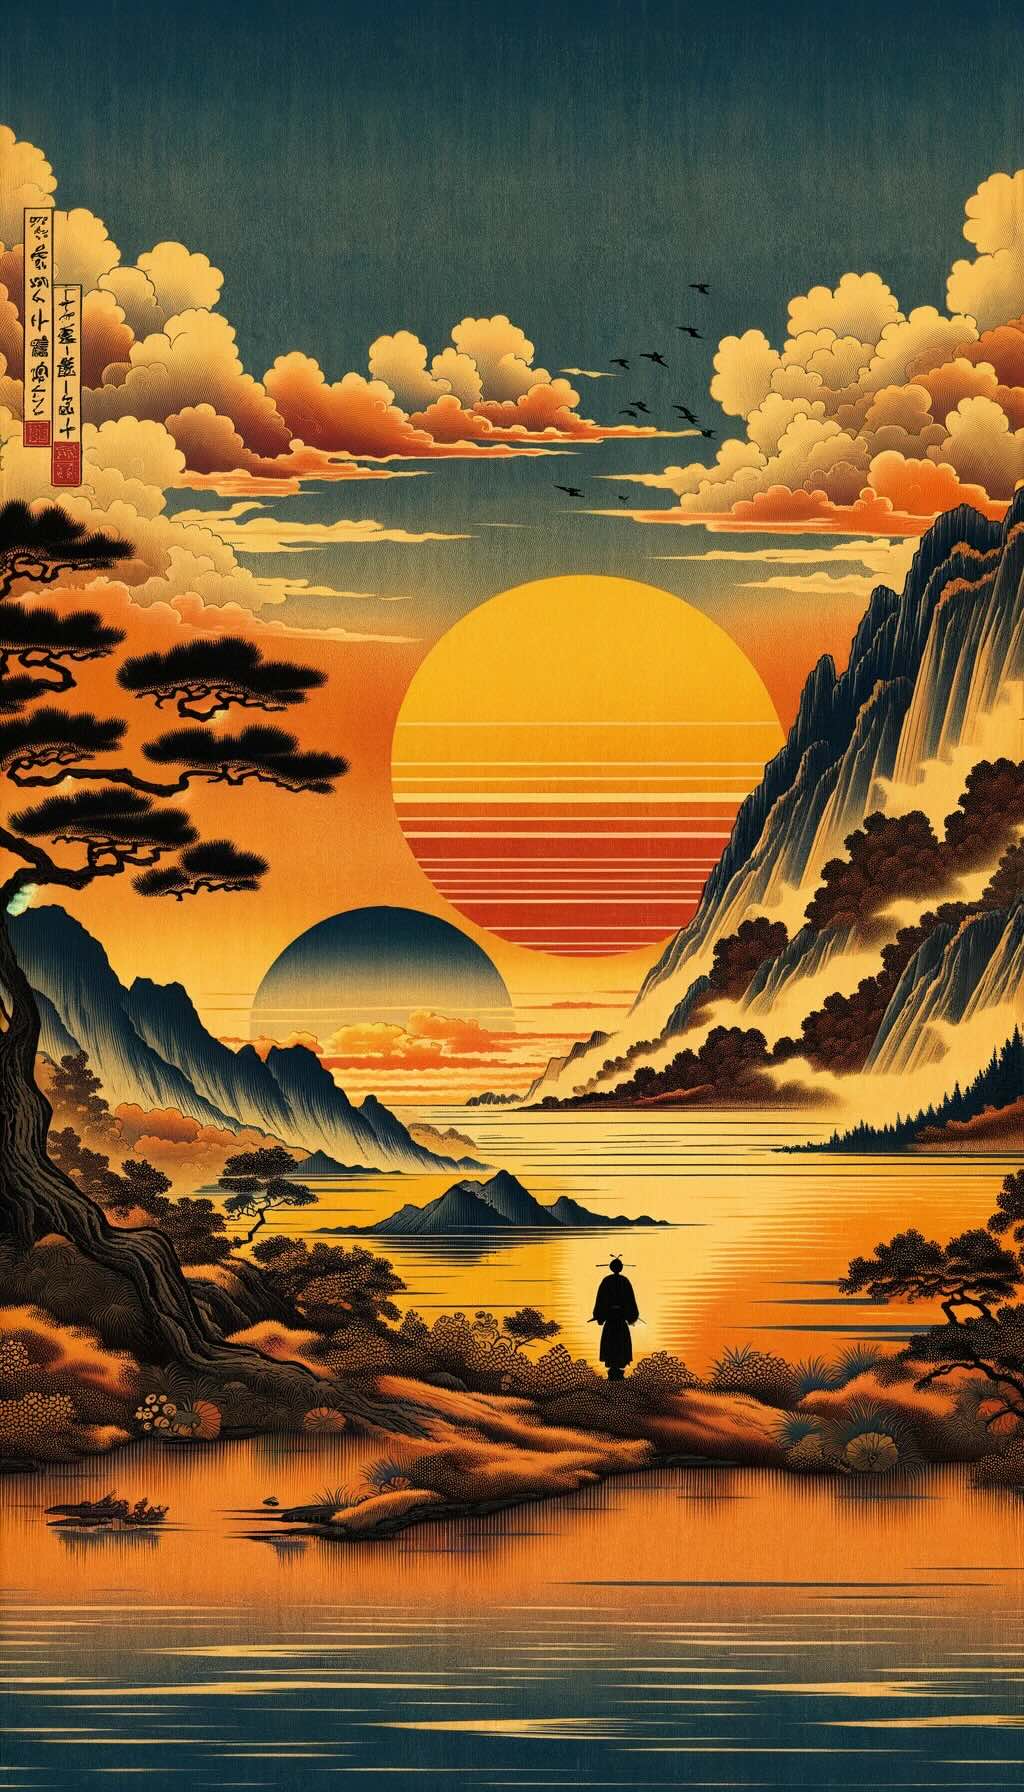 Cultural significance of sunsets in Japanese art and literature beautifully captures the essence of sunsets as portrayed in traditional Japanese haikus and artworks, illustrating serene landscapes under a golden sky and the deep connection between nature's grandeur and cultural reverence.